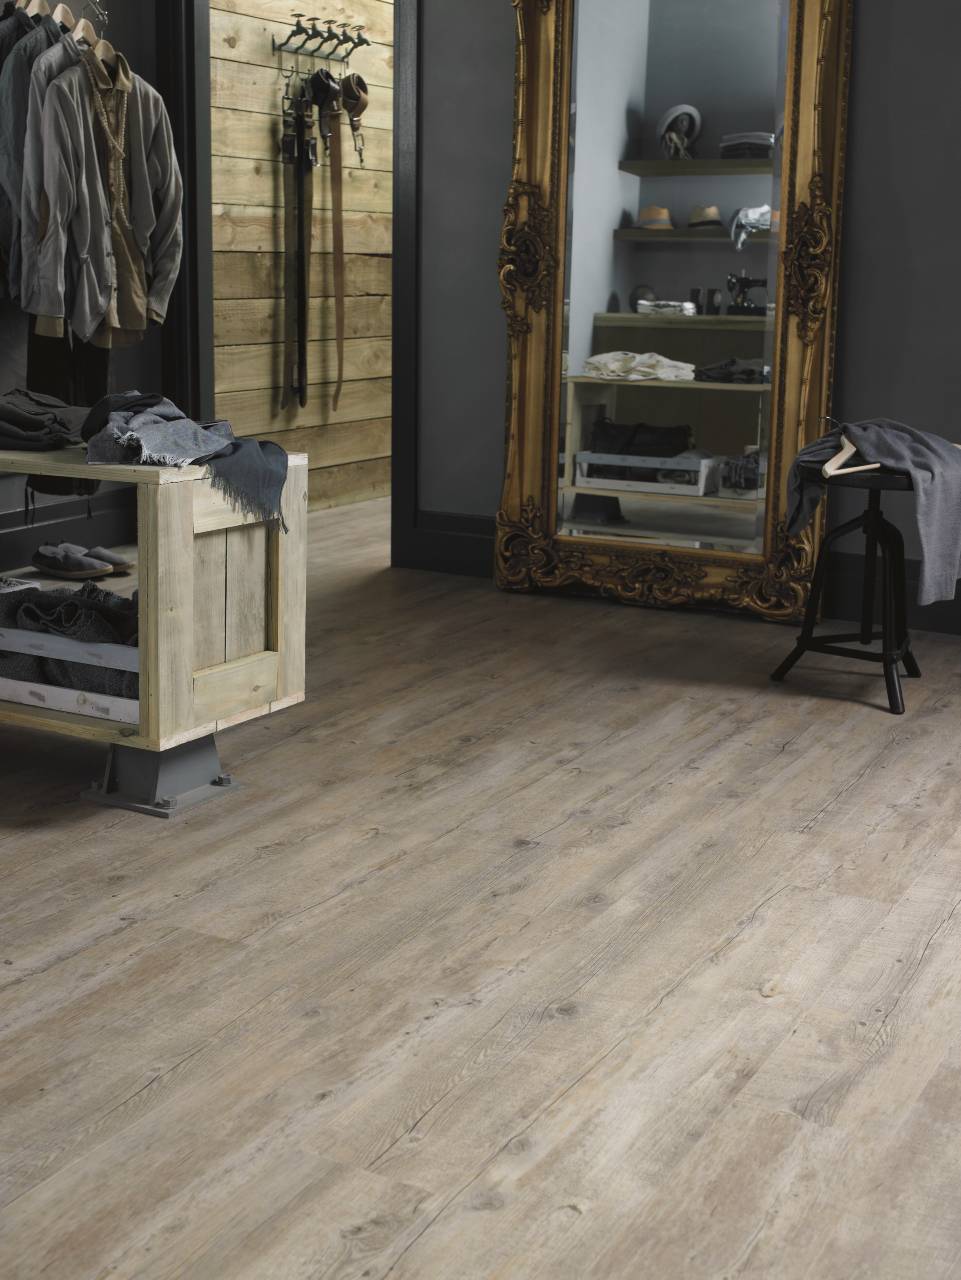 Karndean Van Gogh, Distressed Oak. image supplied by Karndean. Available from Flooring Matters in Devon to supply and install